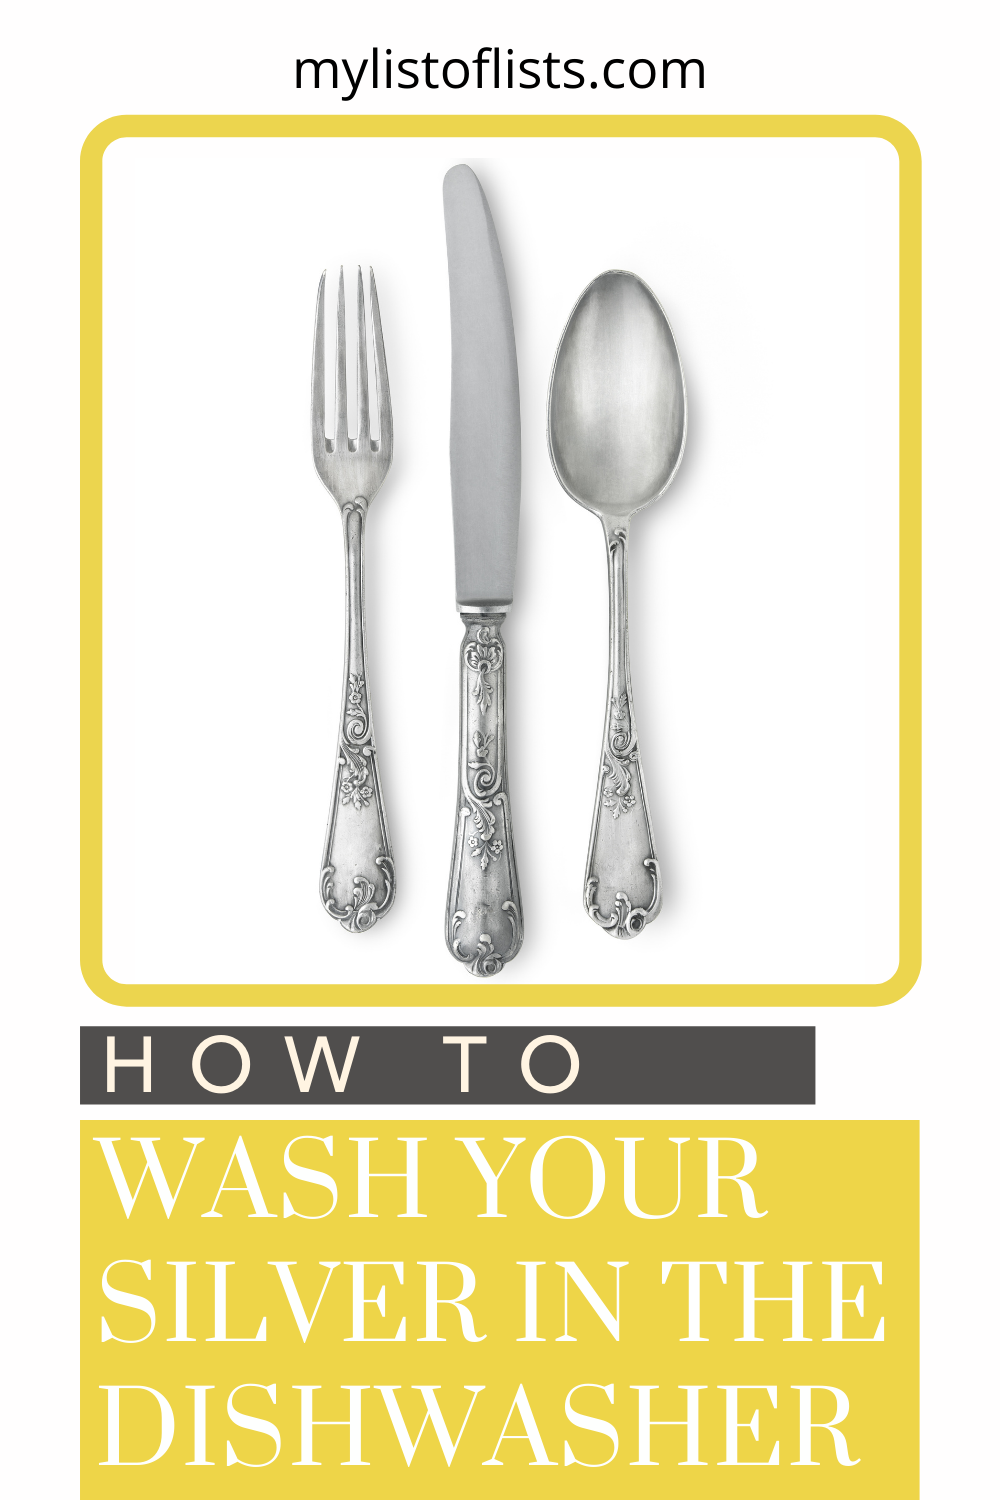 Mylistoflists.com has a little bit of everything. Find loads of ways you can make your life a little bit easier. Learn how you can wash silver in the dishwasher without damaging it!